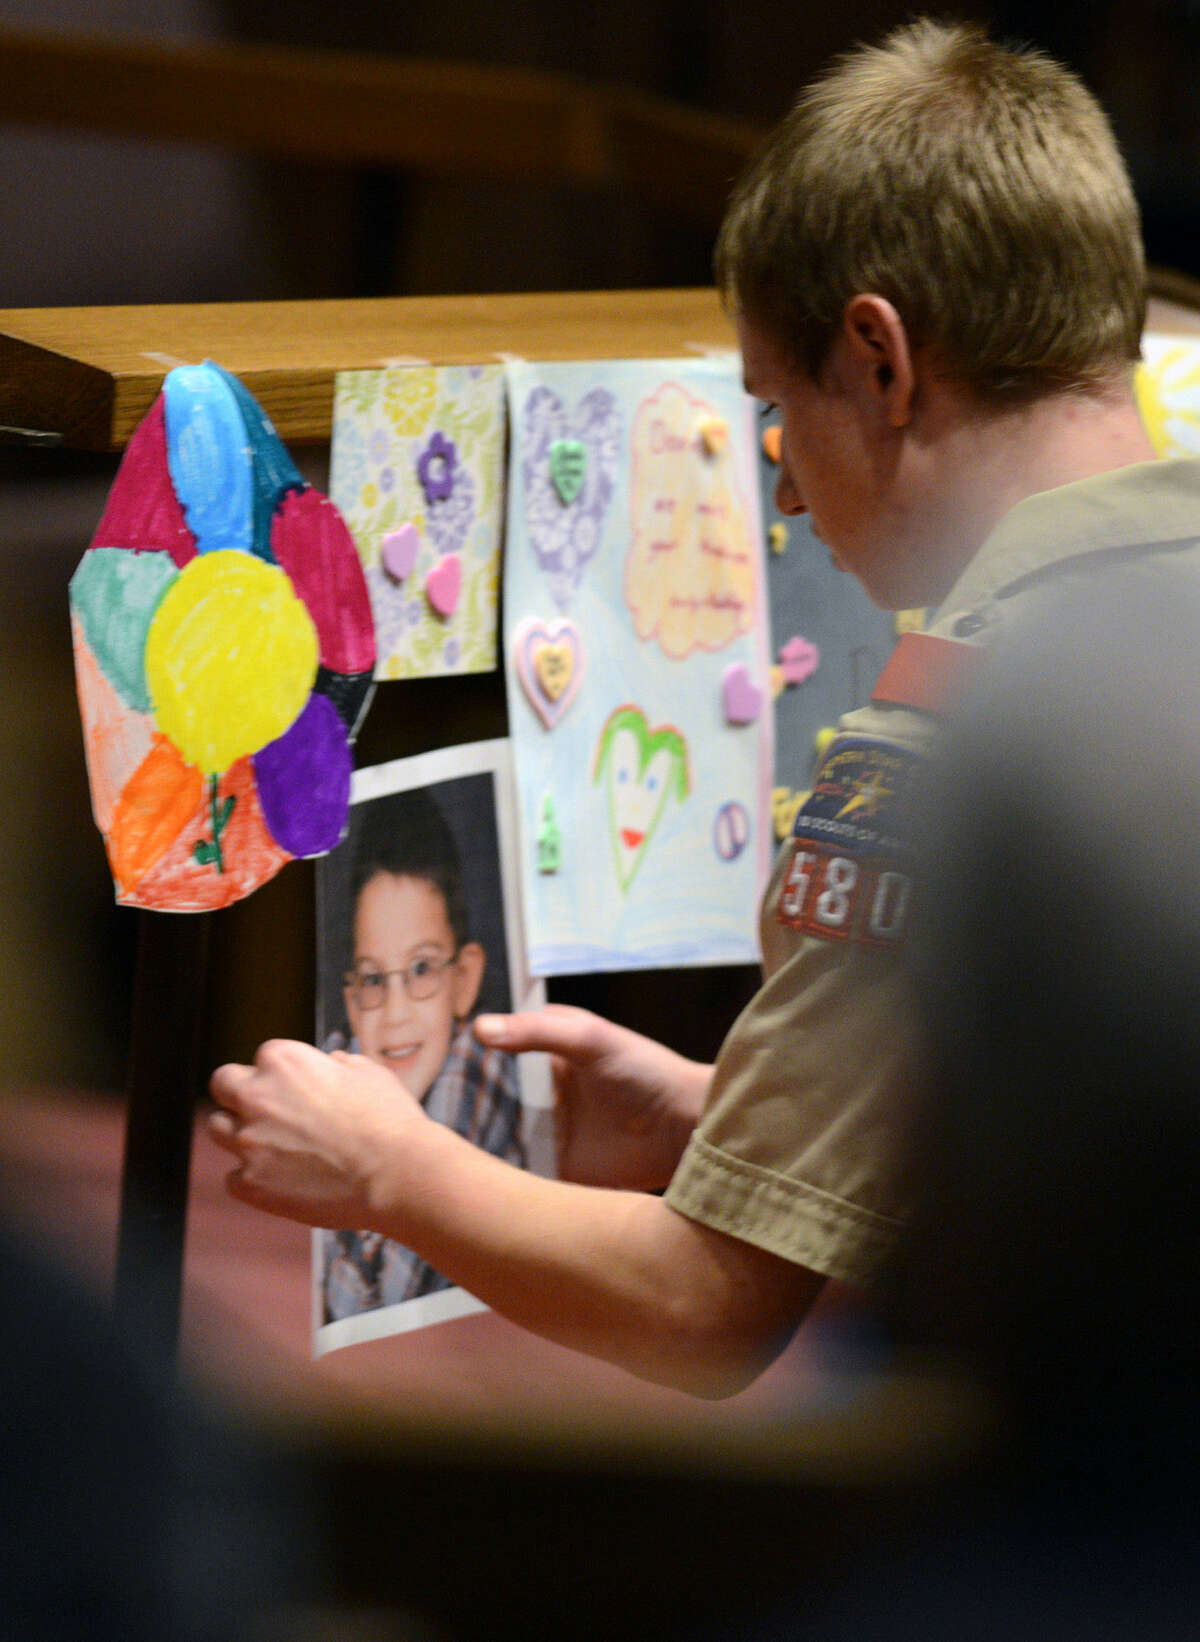 Andrew Horwath hangs a photograph of Devin Aryal, 9, at a candlelight vigil. Devin was slain in Oakdale, Minn., in an apparent random shooting.